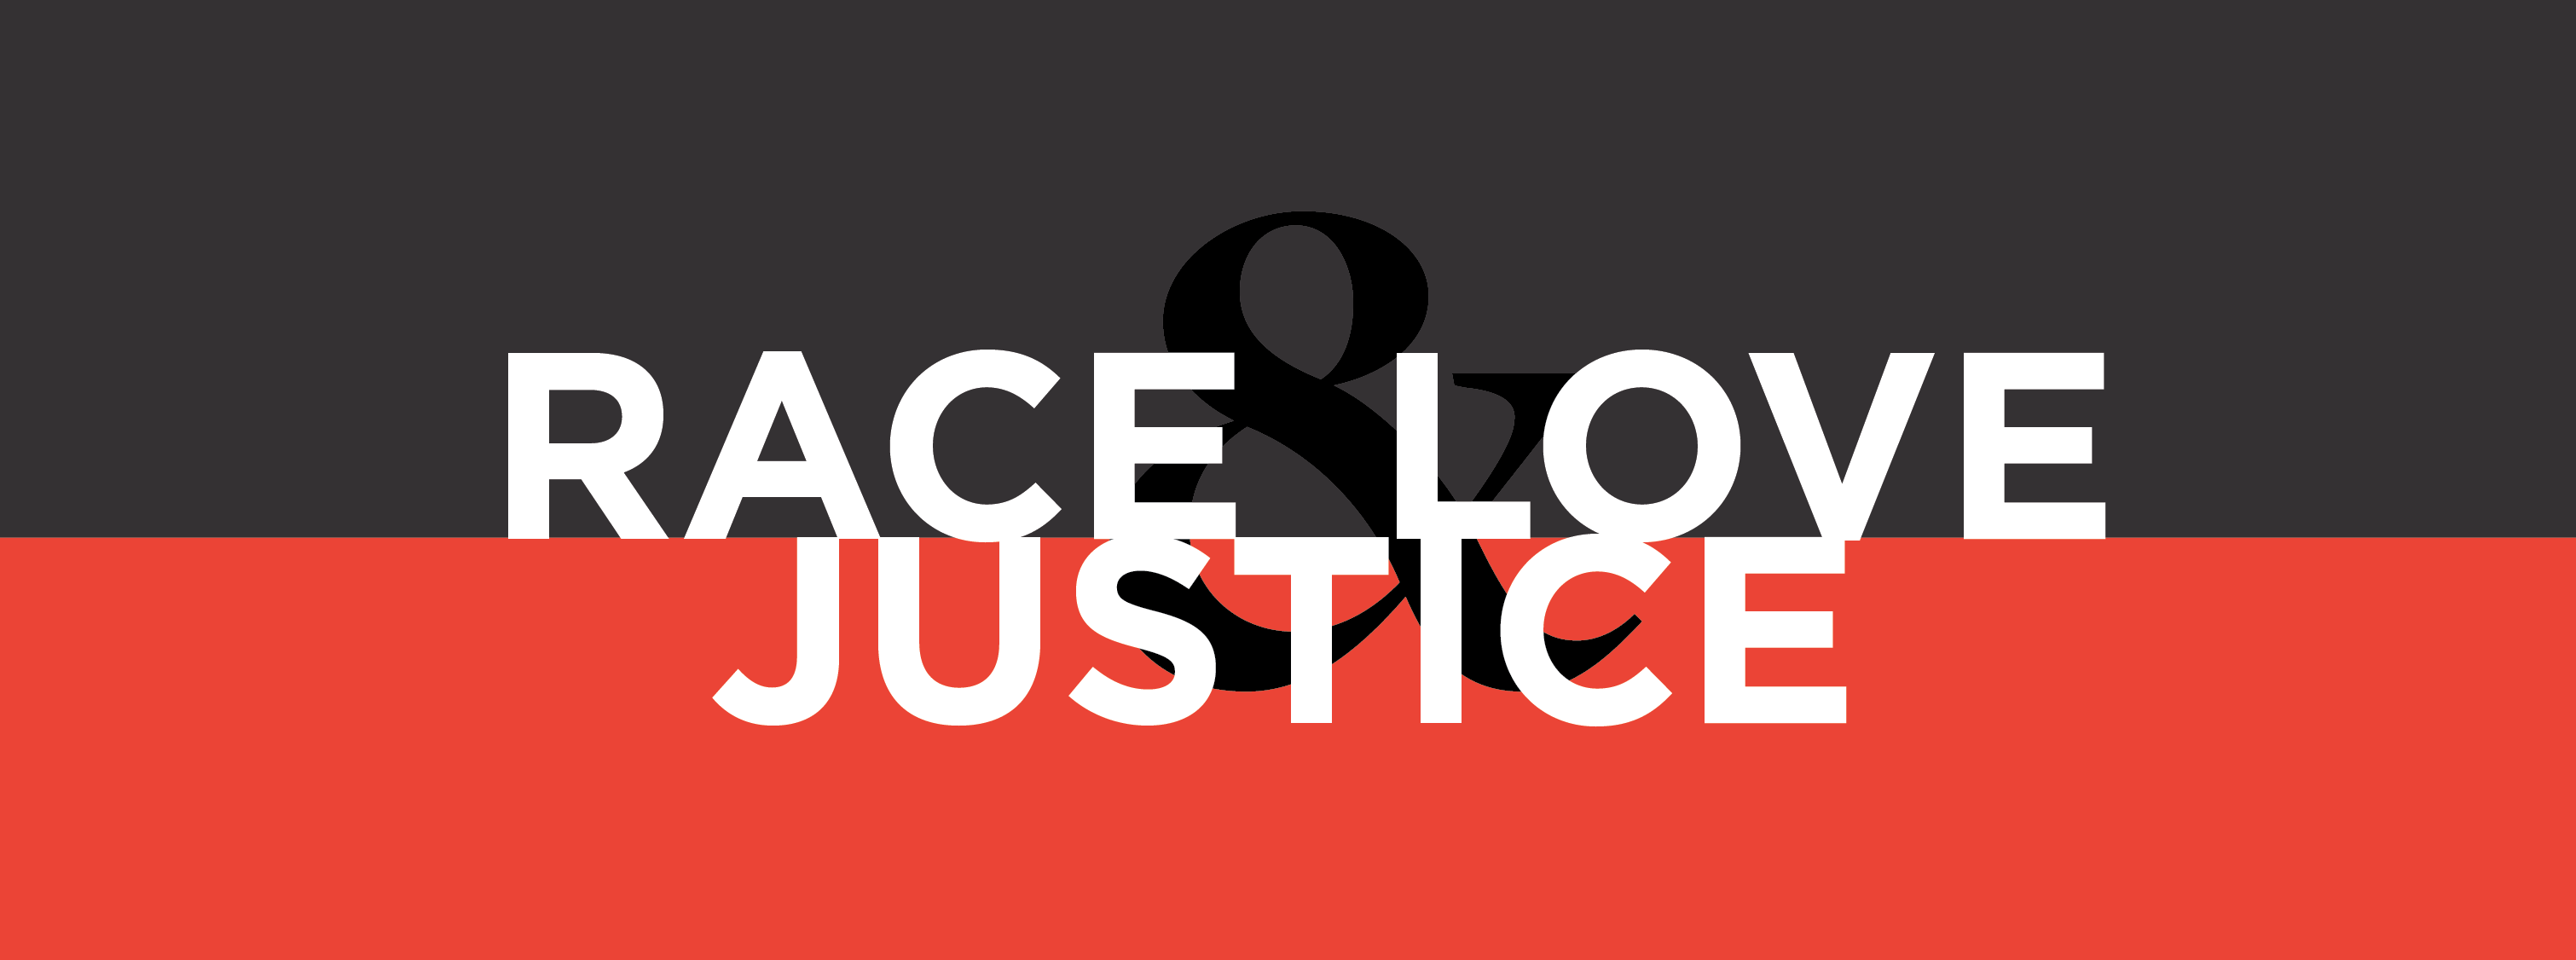 Race, Love, and Justice